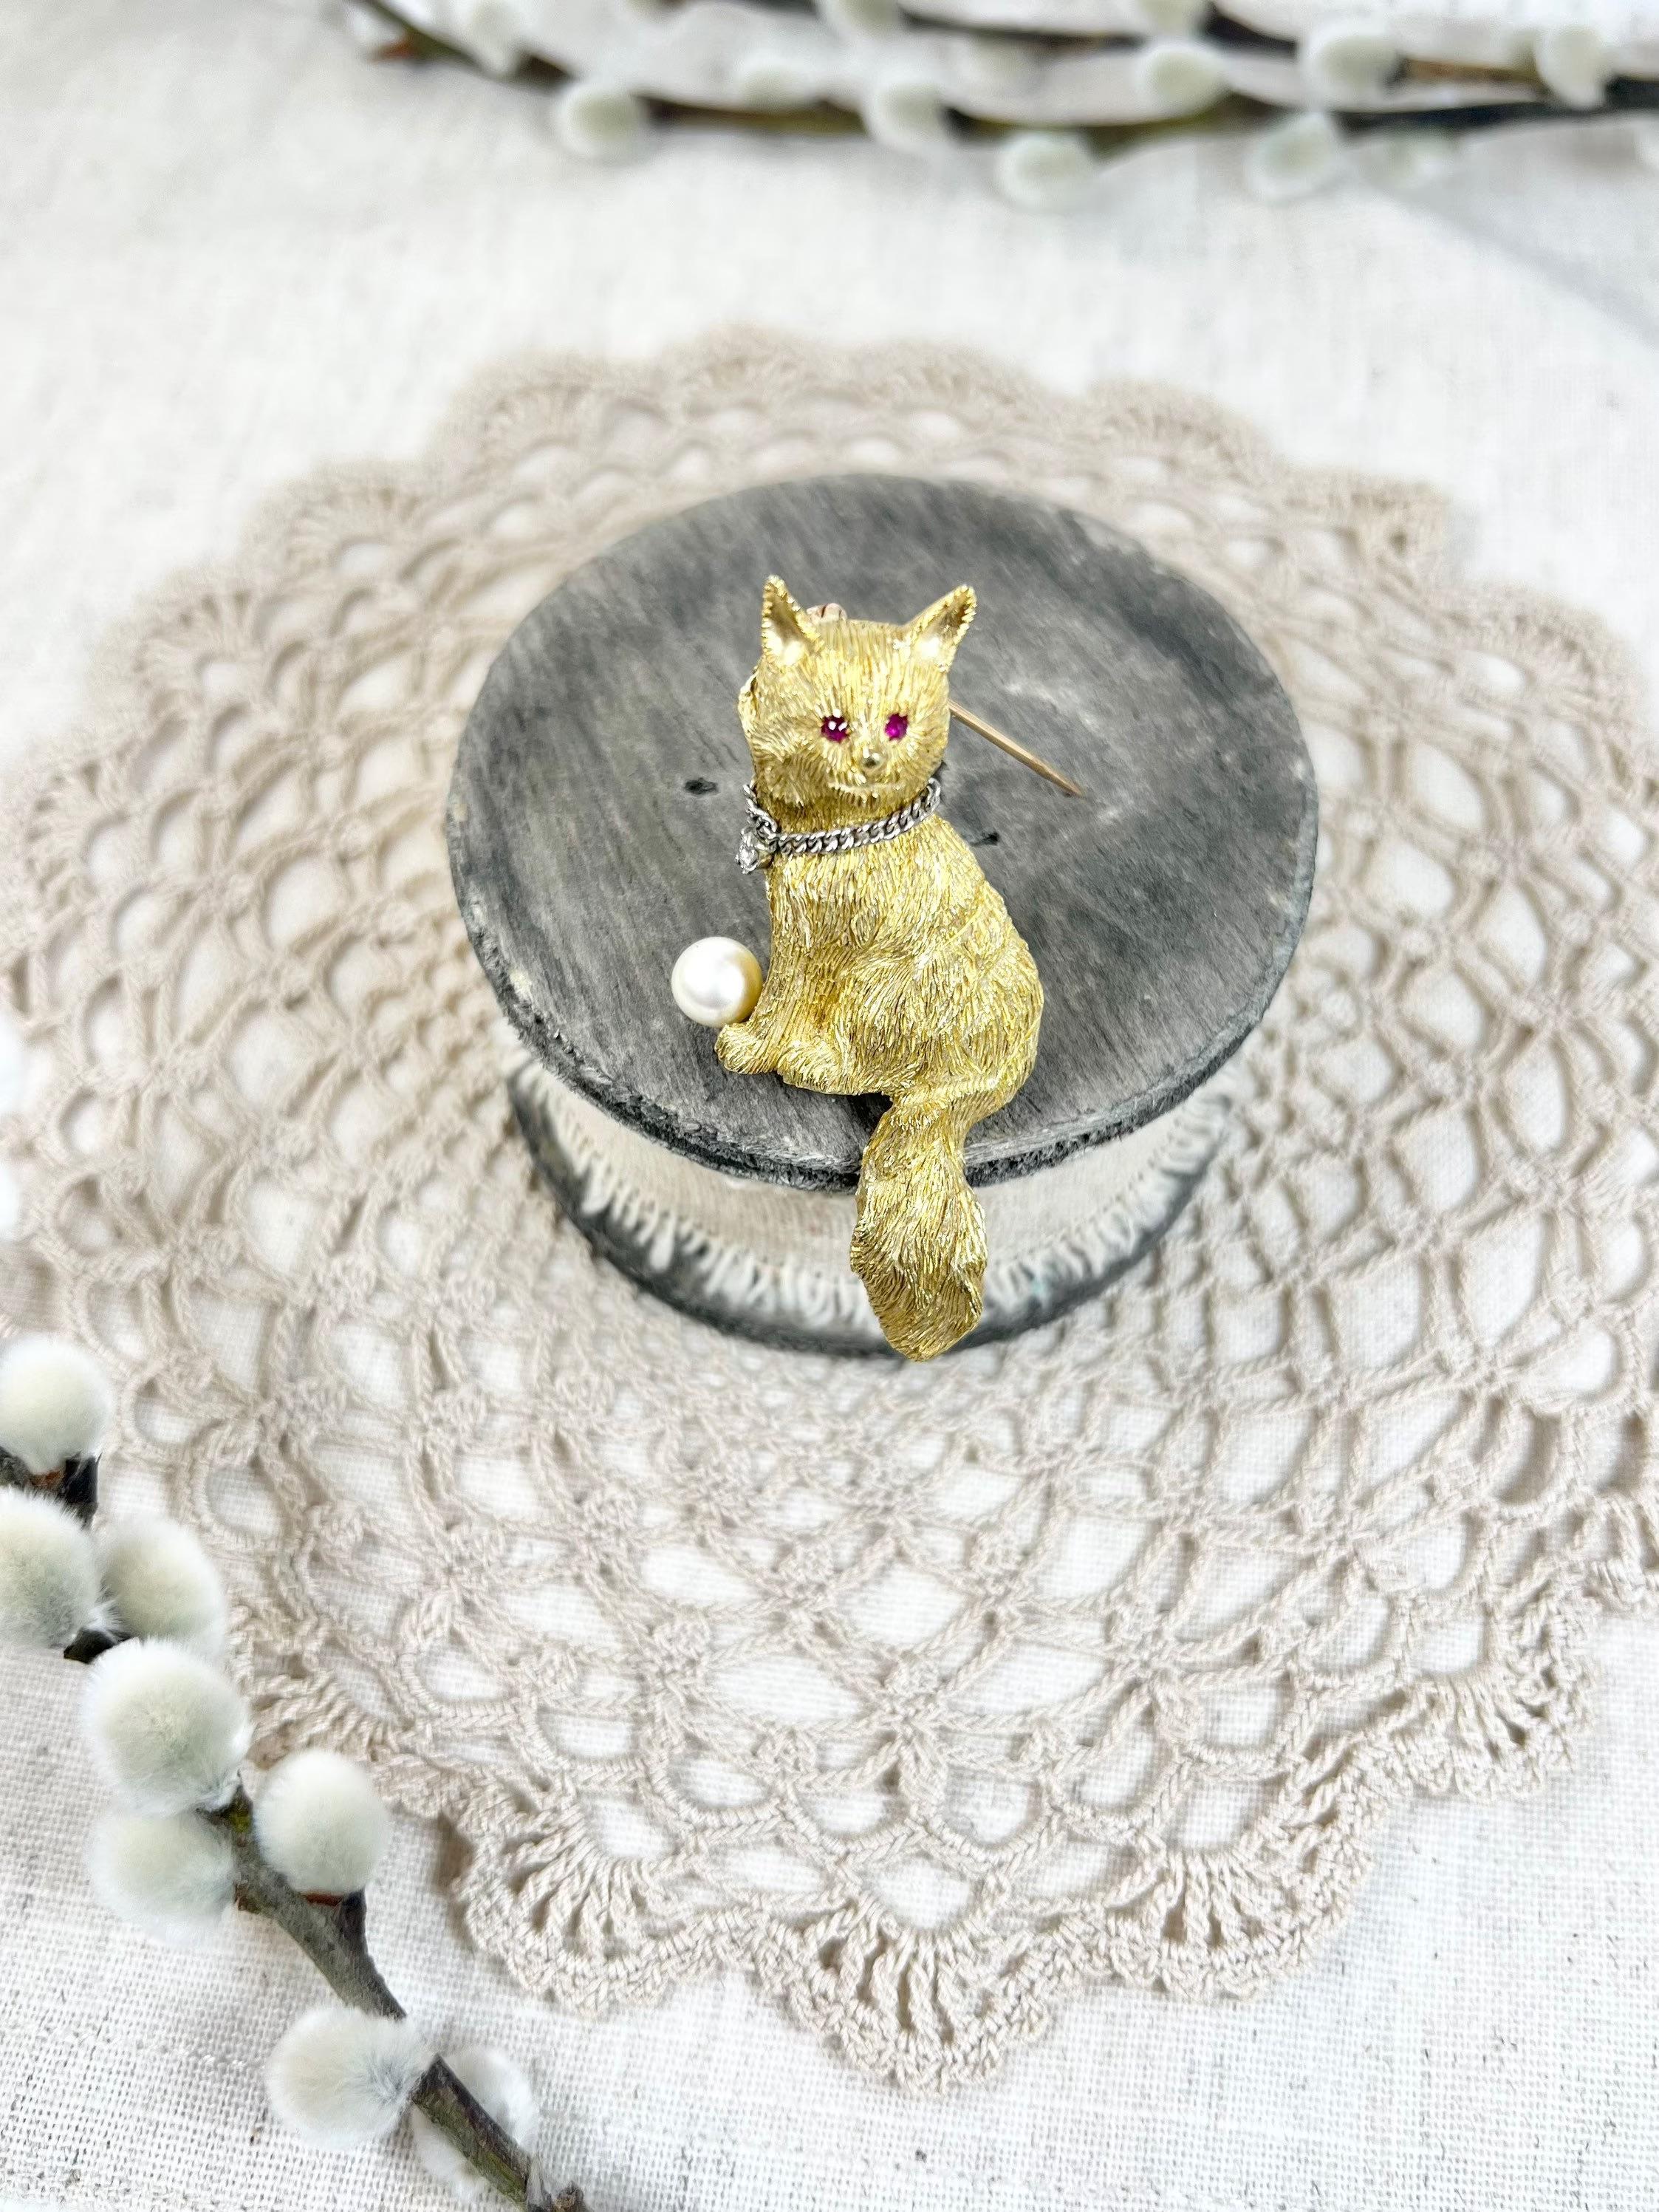 18ct Gold 1920’s Cat Brooch Ruby eyes Diamond drop collar cultured pearl at paws For Sale 3